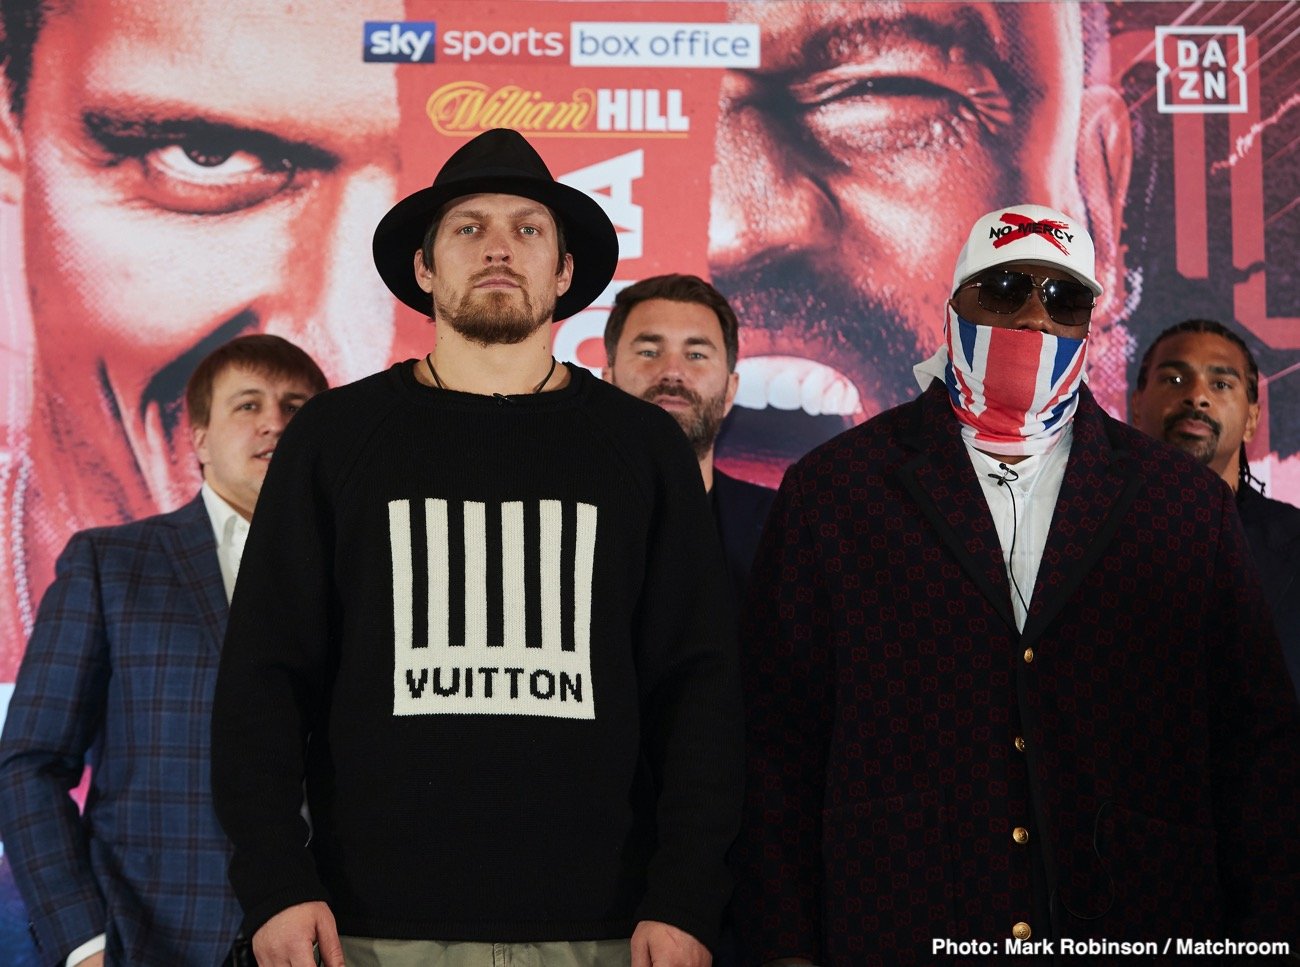 Usyk / Chisora London press conference quotes